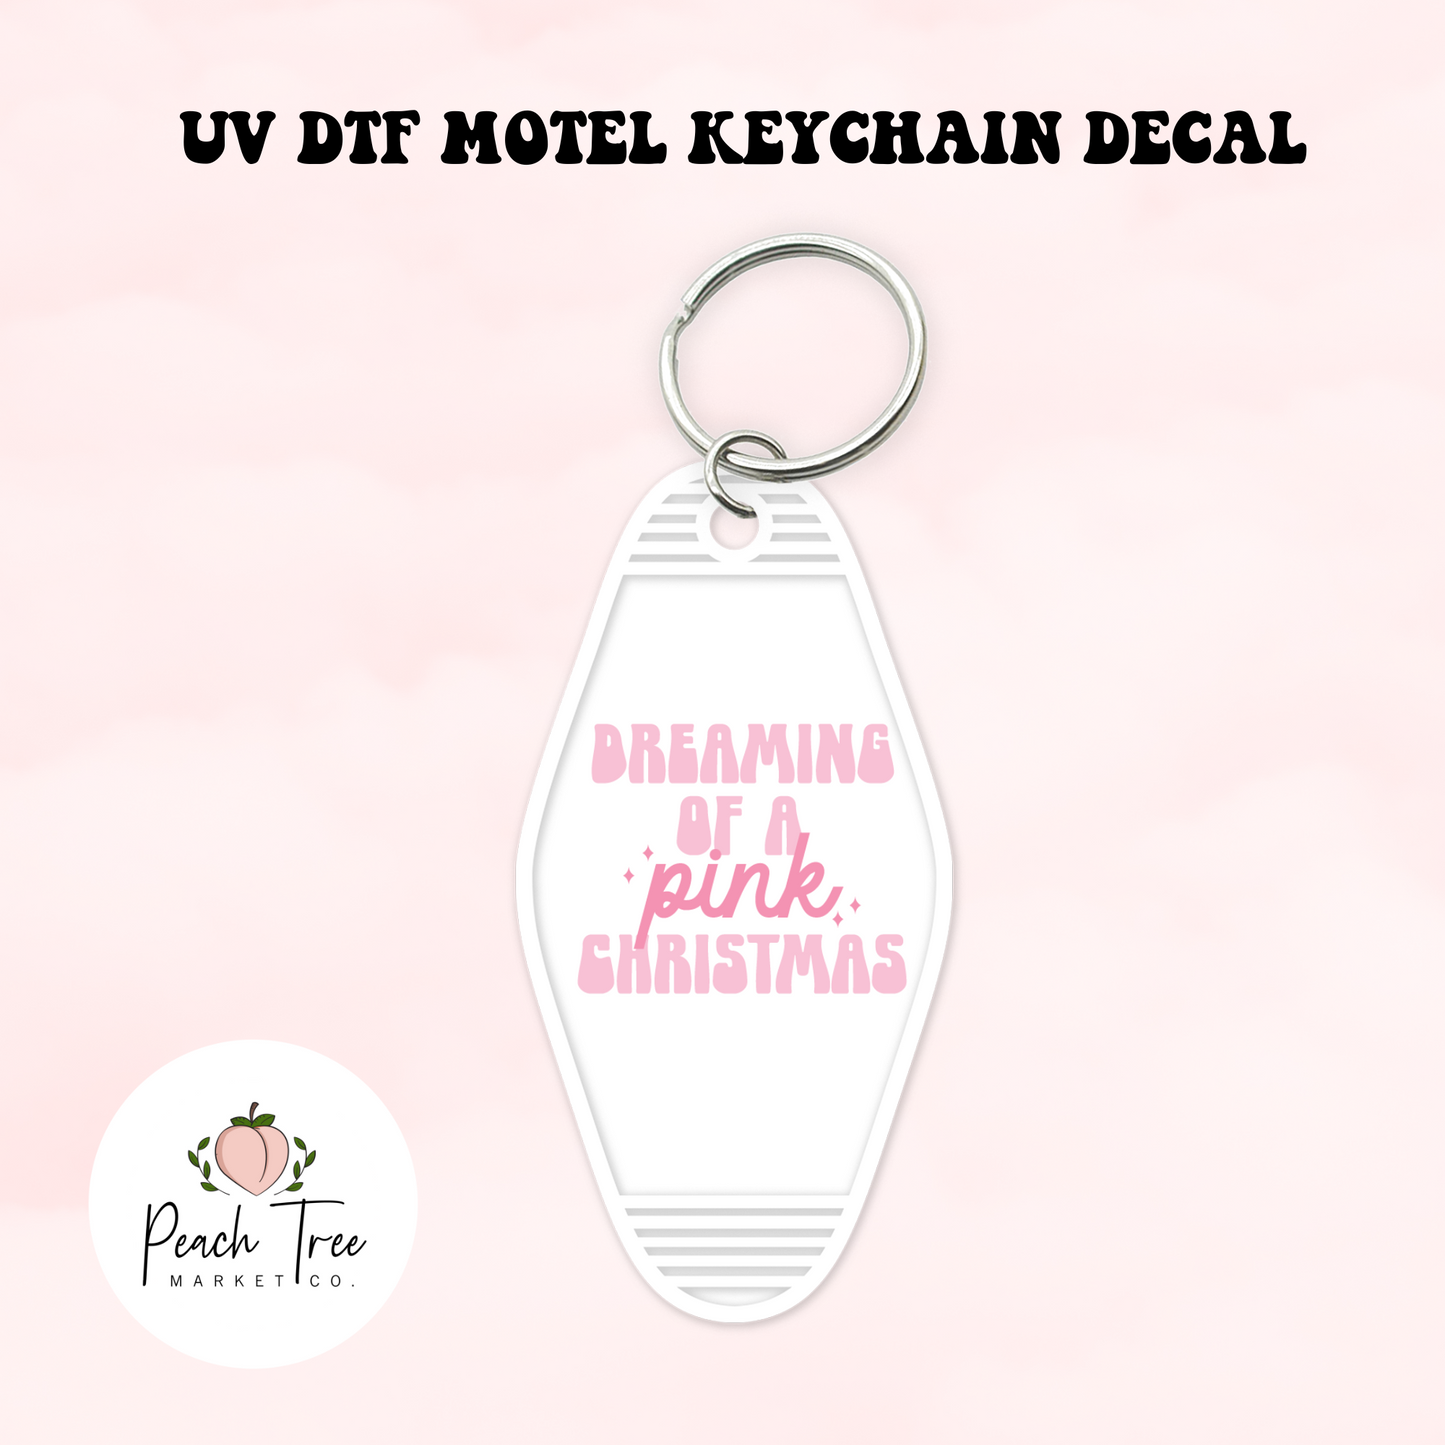 Dreaming Of a Pink Christmas UV DTF Motel Keychain Decal